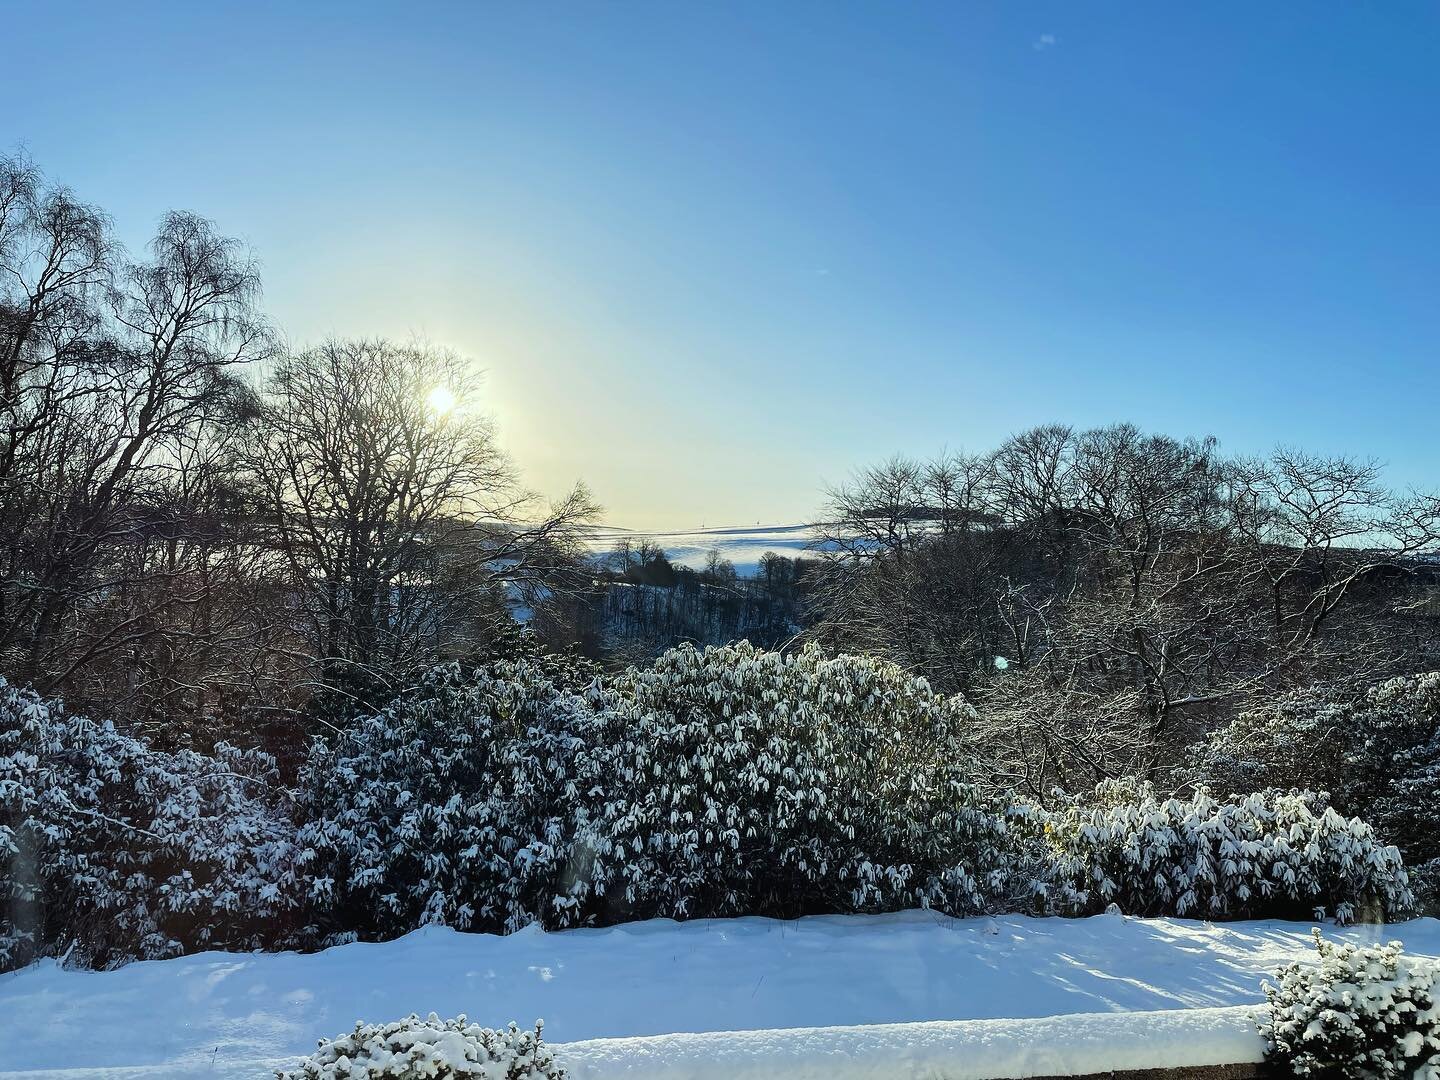 Life has slowed down this week, in some ways&hellip; snow has blanketed Aberdeenshire but we are snug and warm - and staying put!

In other ways we are quite busy, preparing for the season ahead, dotting the i&rsquo;s and crossing the t&rsquo;s for t